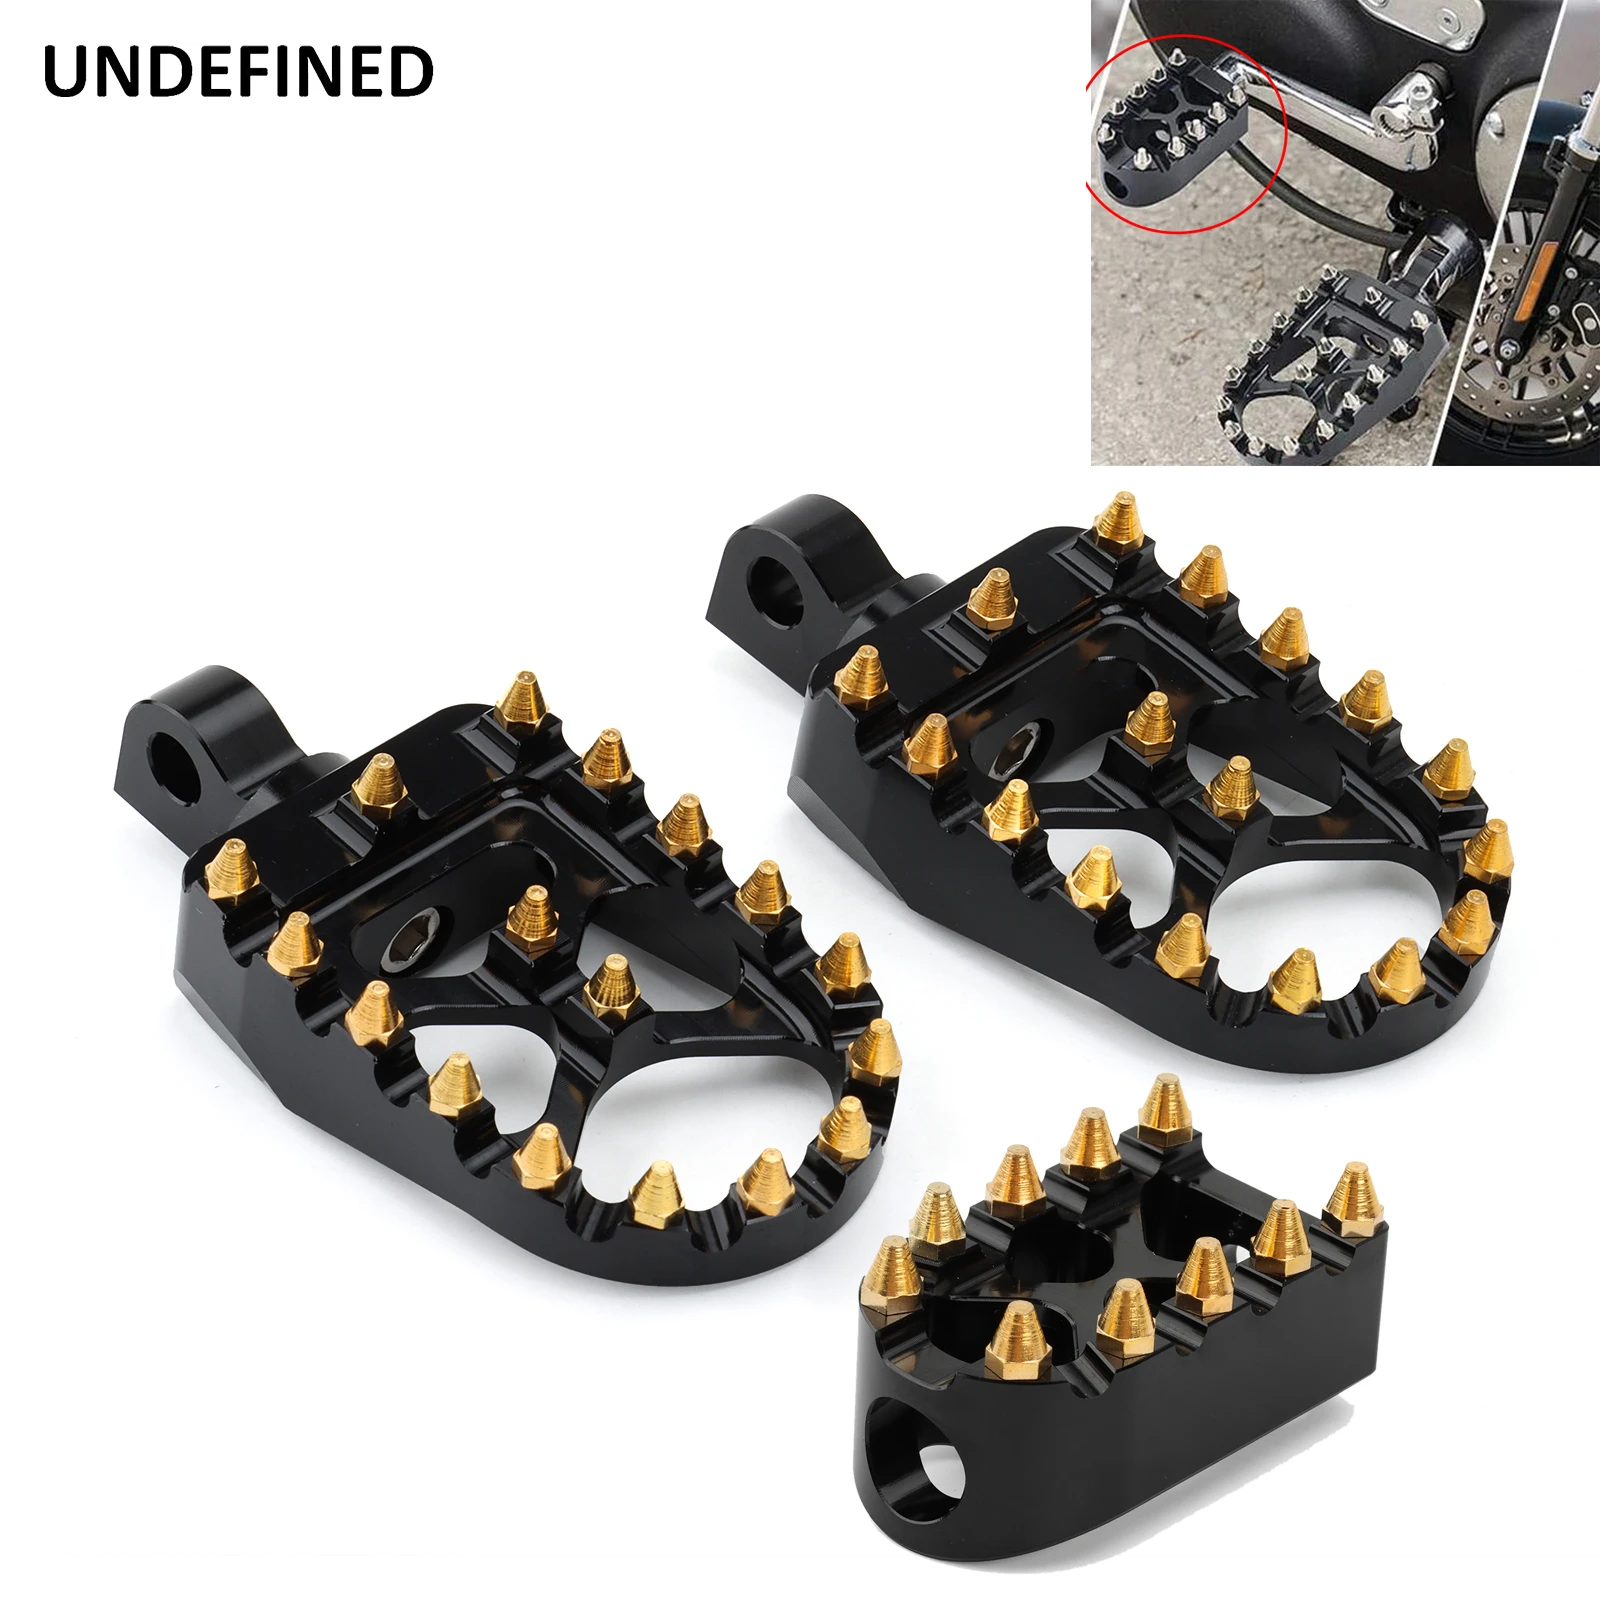 MX Style Shift Shifter Peg & Wide Foot Pegs For Harley Dyna Sportster XL883 1200